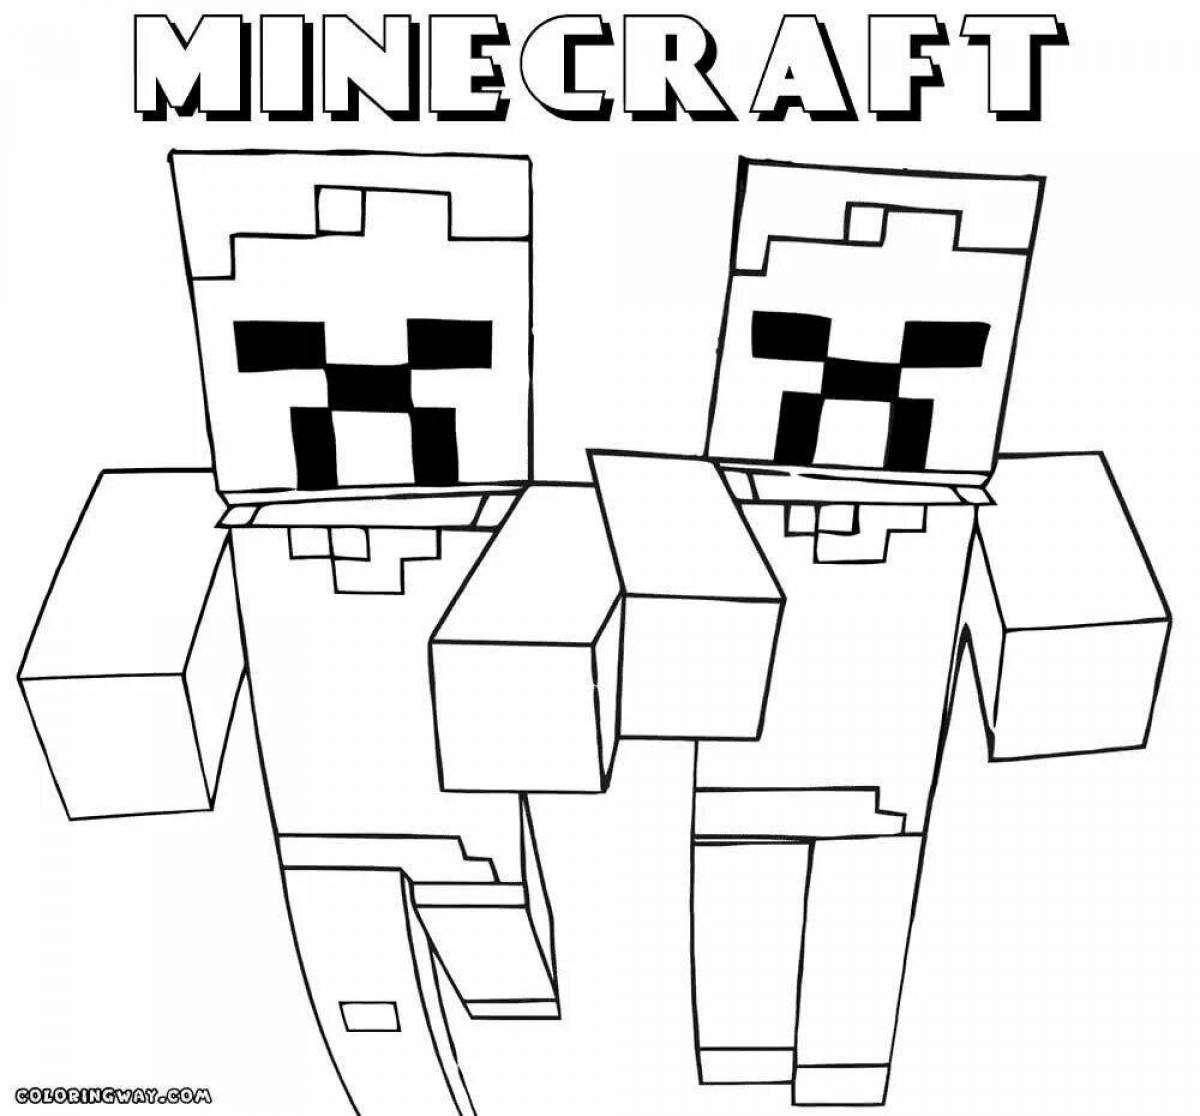 Colorful minecraft coloring book for 7 year old boys